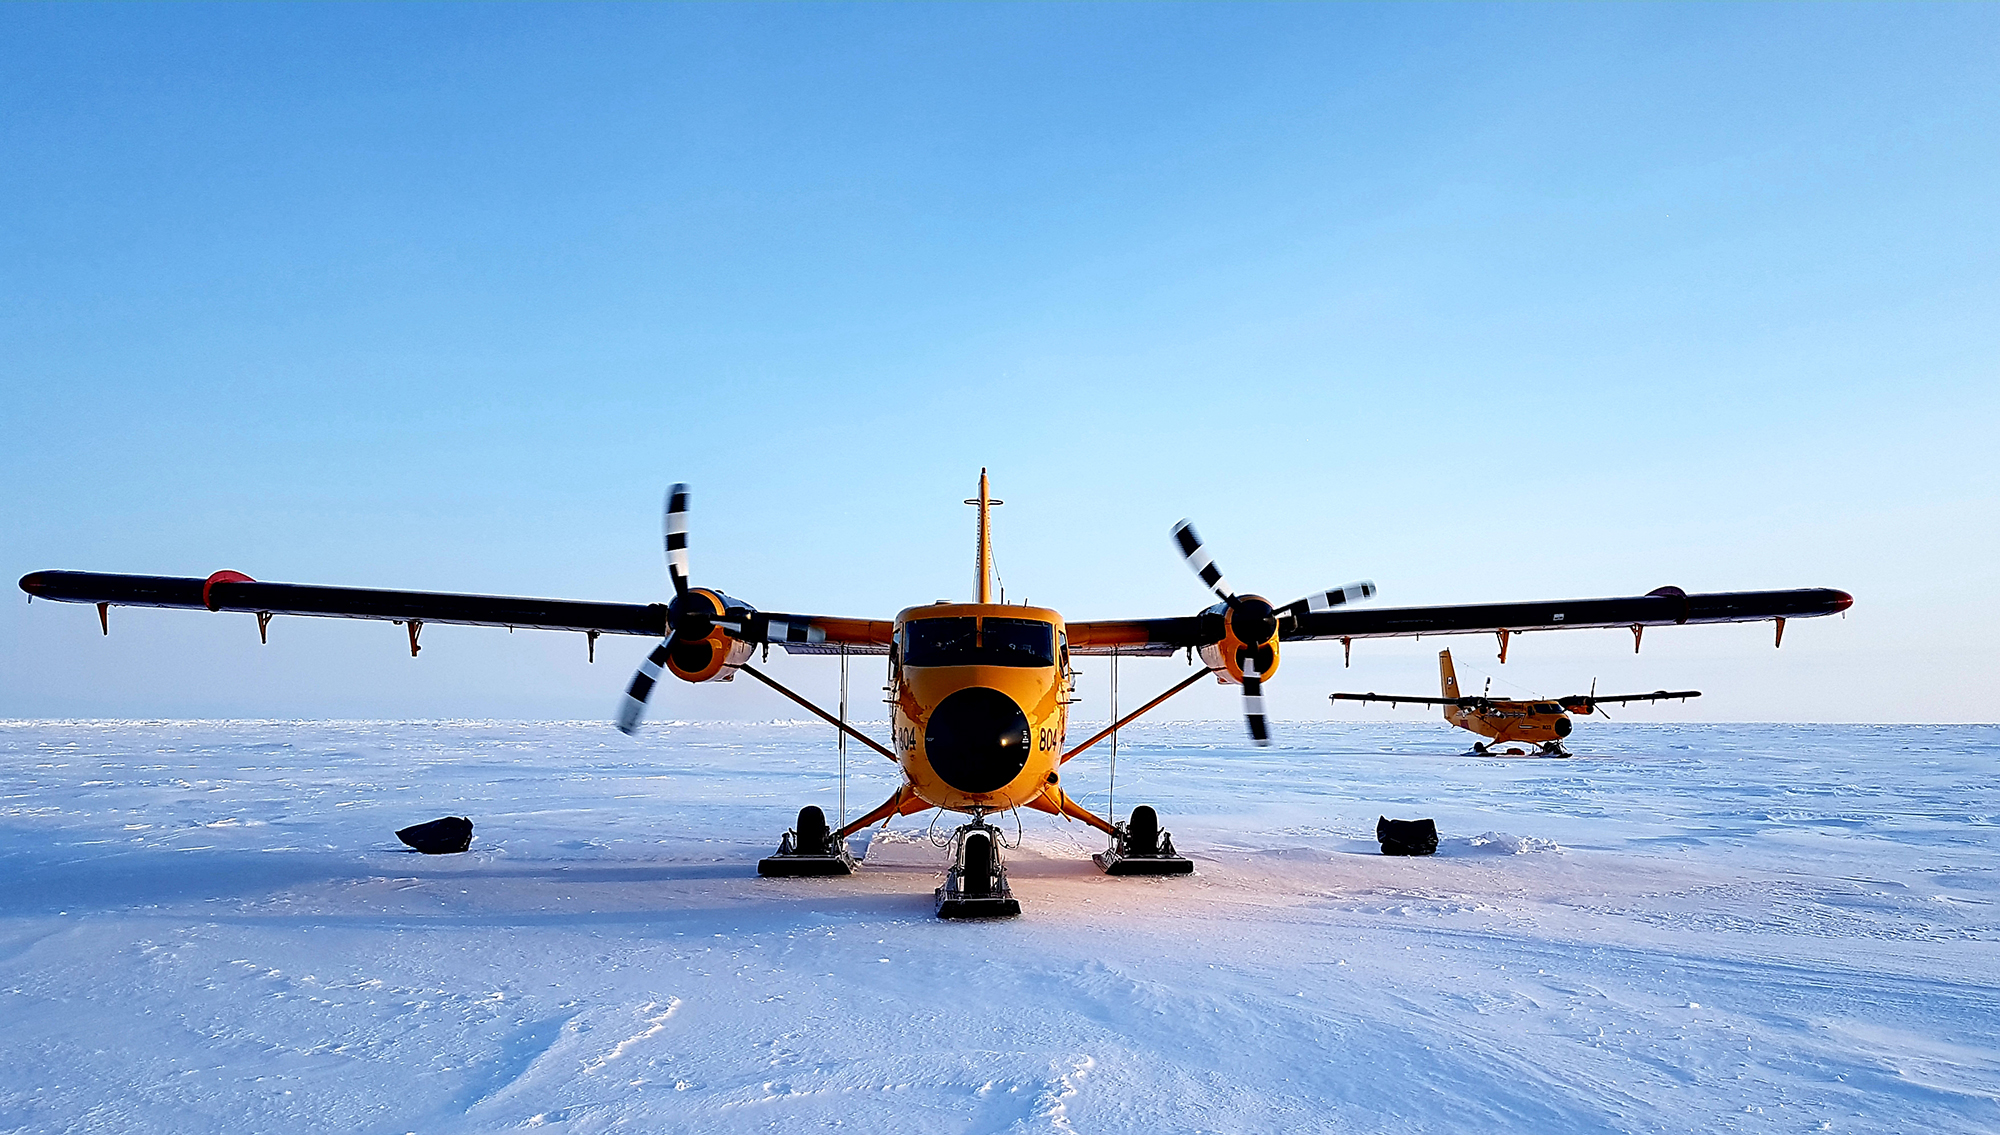 Two orange twin-propeller aircraft equipped with skis on snow in the Arctic.